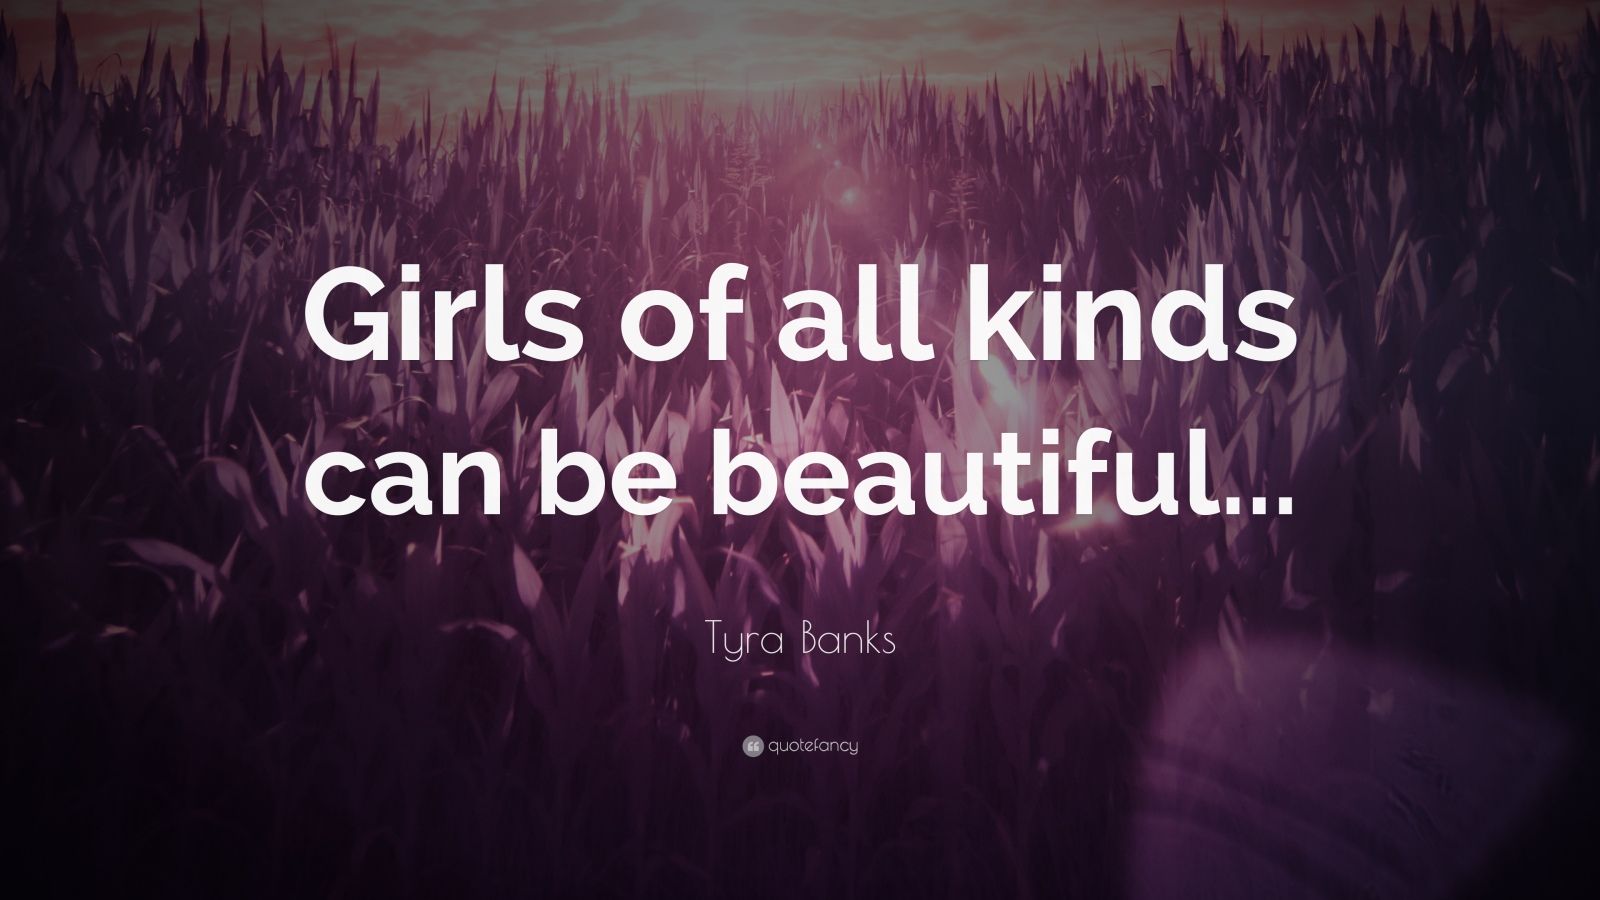 Tyra Banks Quote: “Girls of all kinds can be beautiful...”